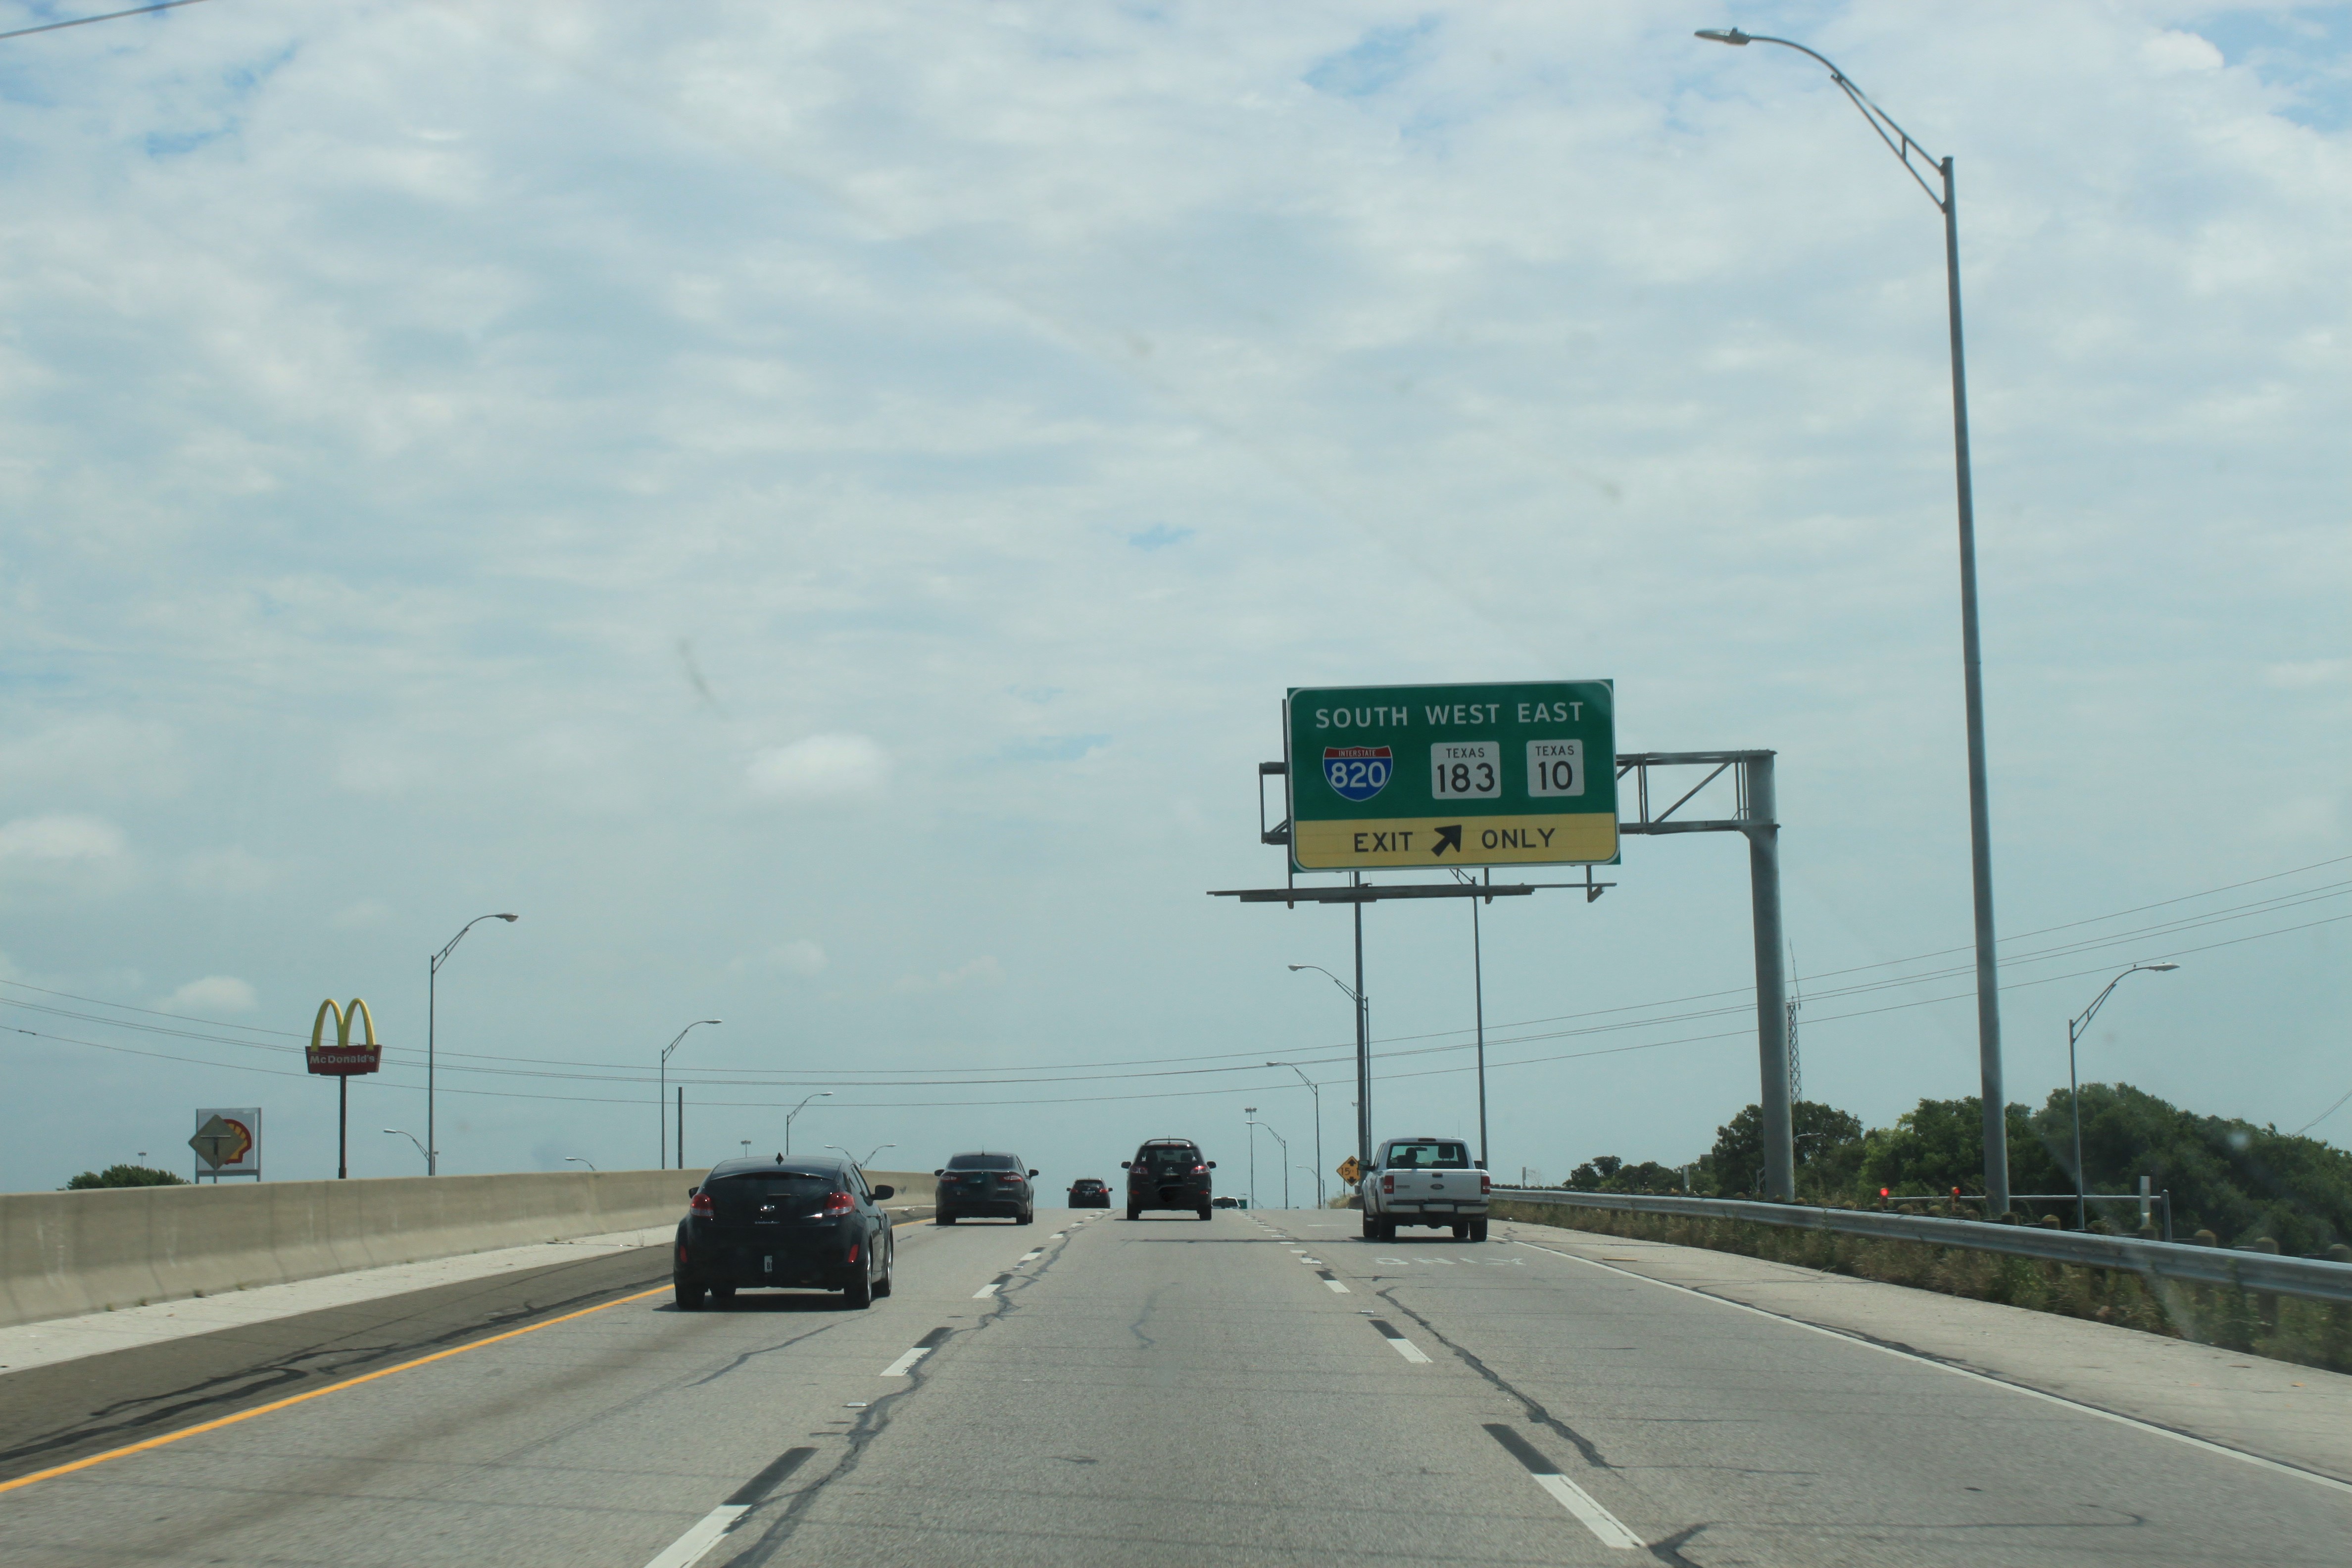 SH 121 northbound approaching I-820 at Handley Ederville Rd. Large overhead sign for southbound I-820, westbound SH 183, and eastbound SH 10 seen in mid-ground.